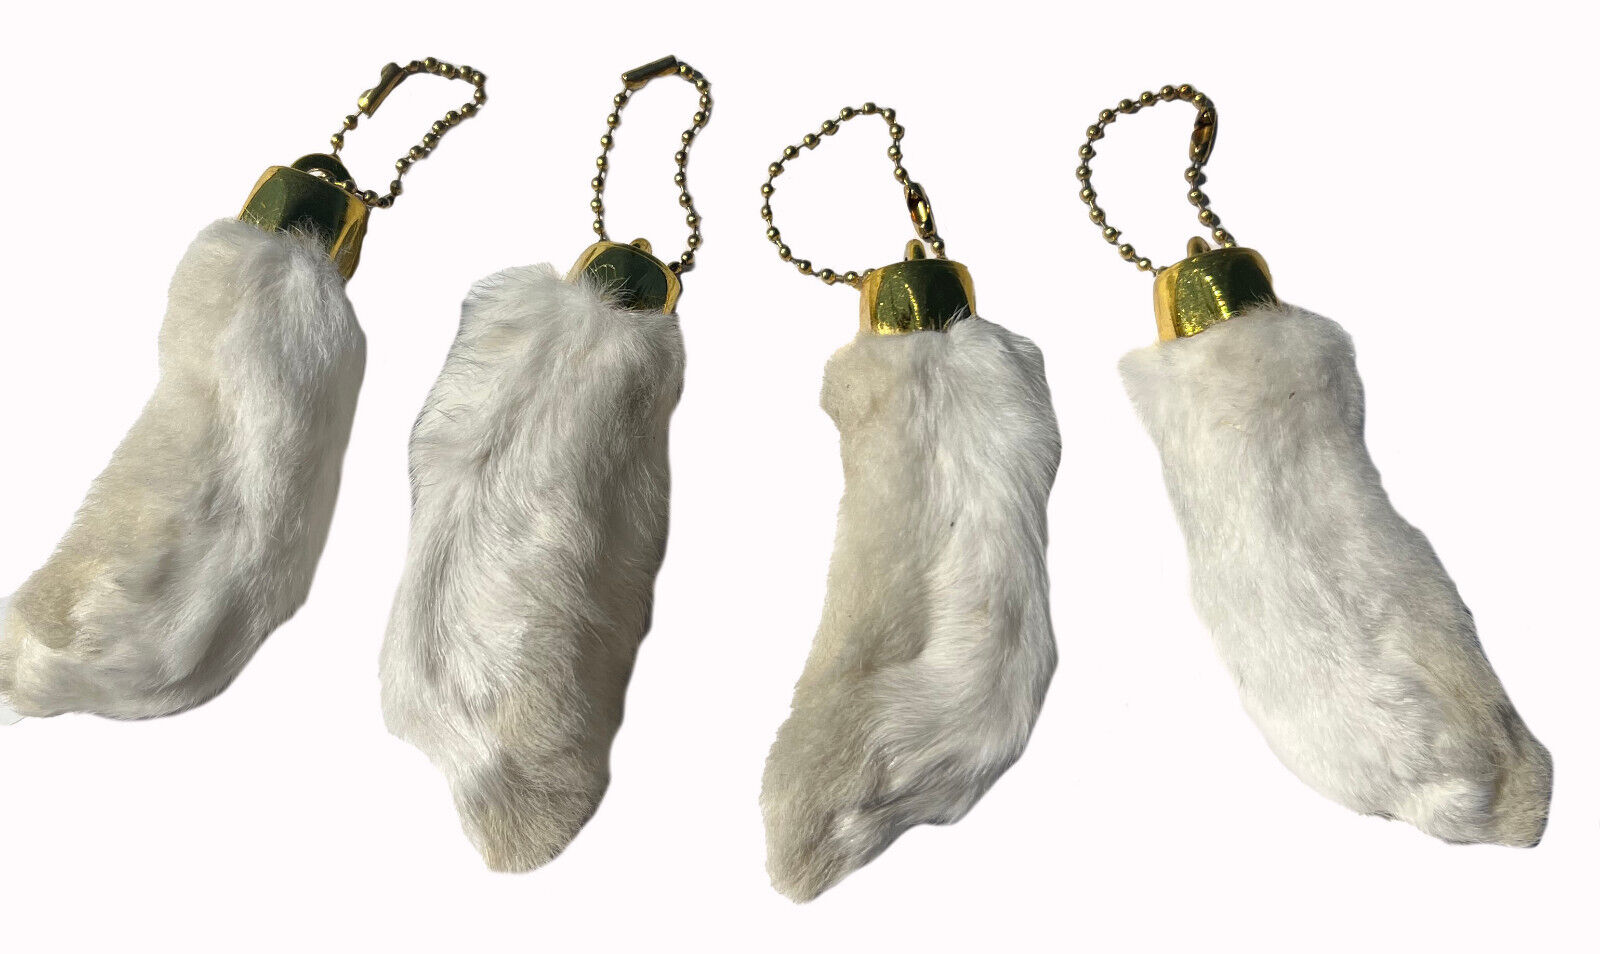 4 NATURAL COLOR LUCKY  RABBIT FOOT KEY CHAIN real rabbits feet authentic BULK